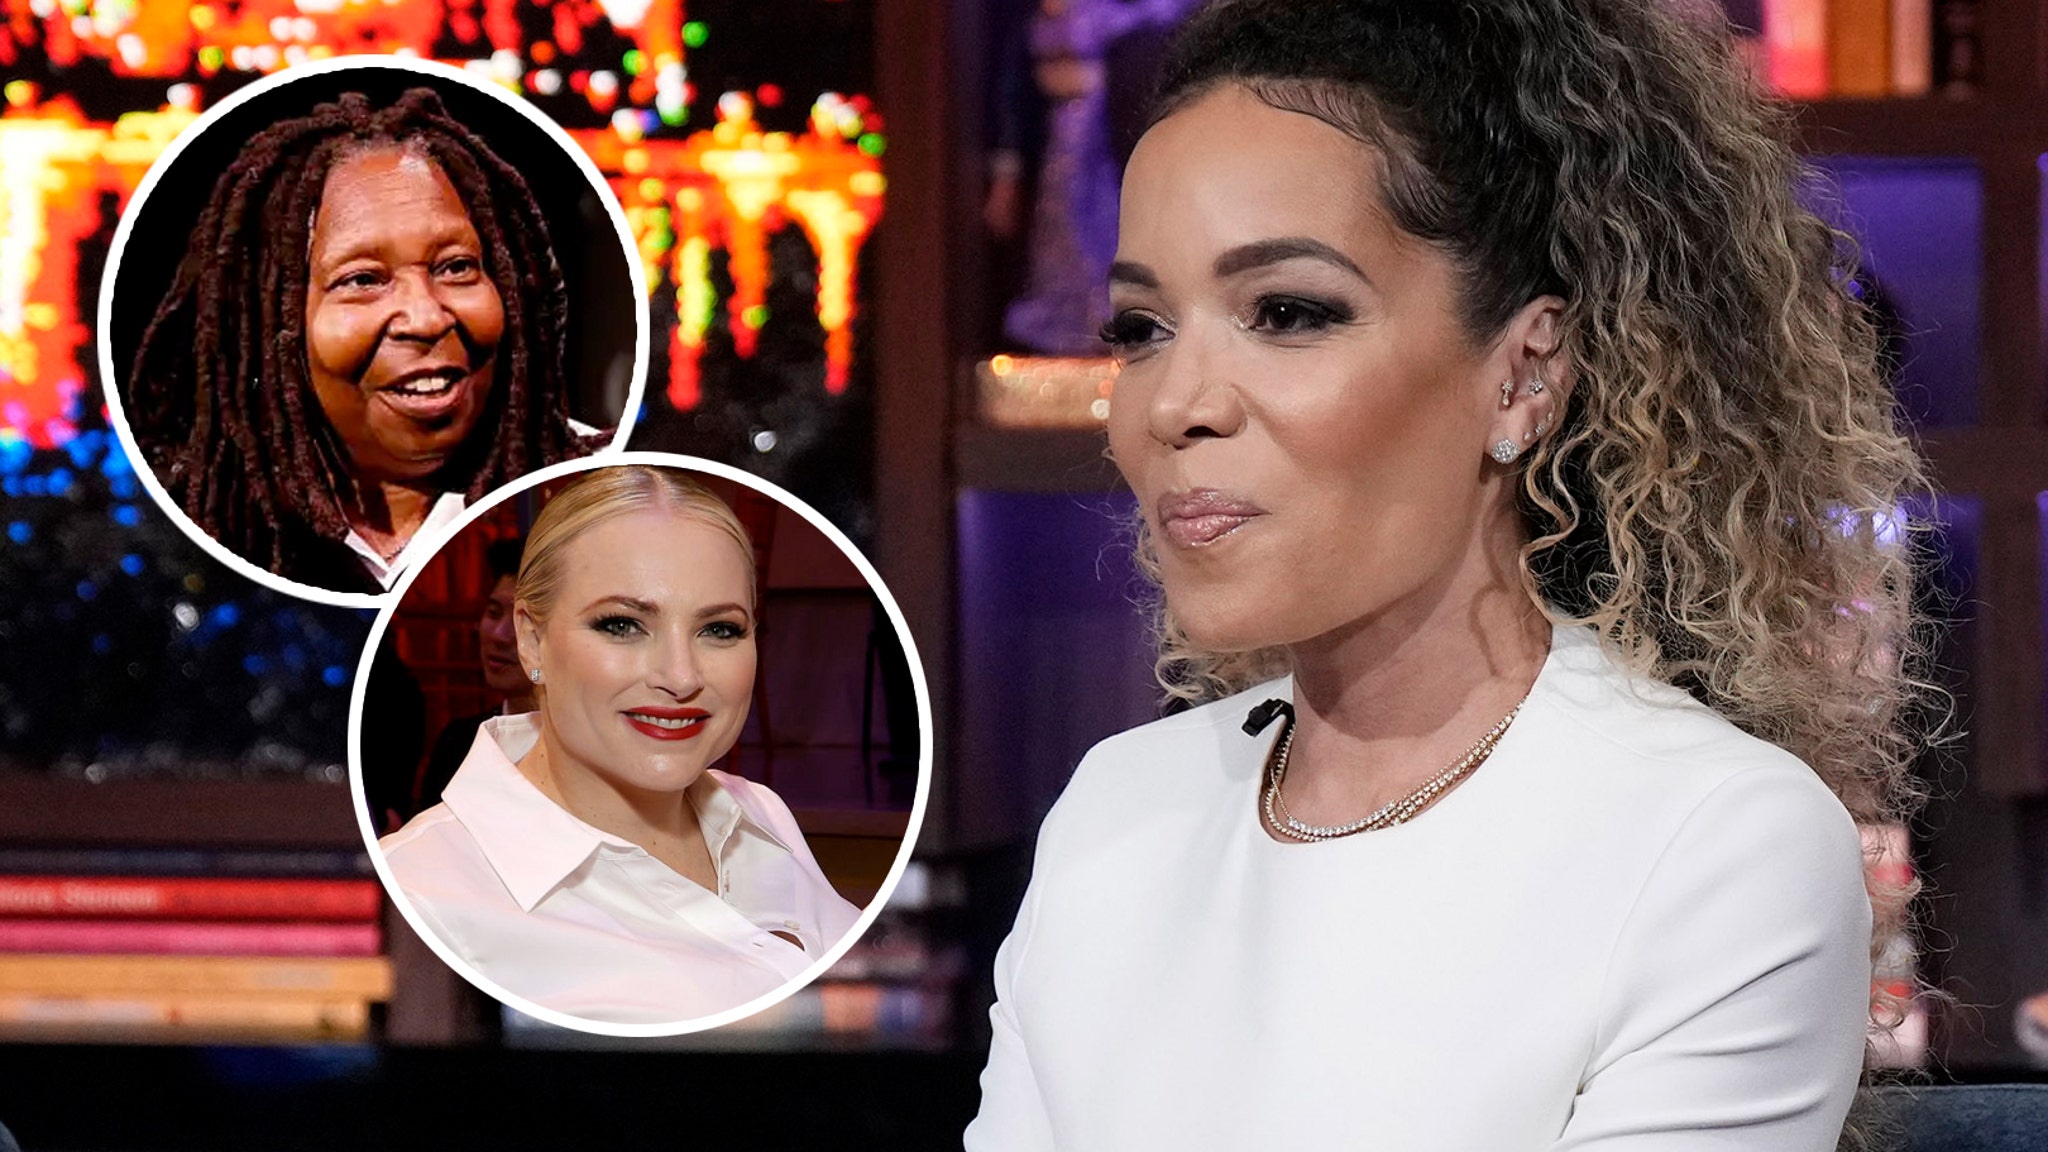 Sunny Hostin's WWHL Comments Landed Her In Hot Water with Whoopi Goldberg, Meghan McCain